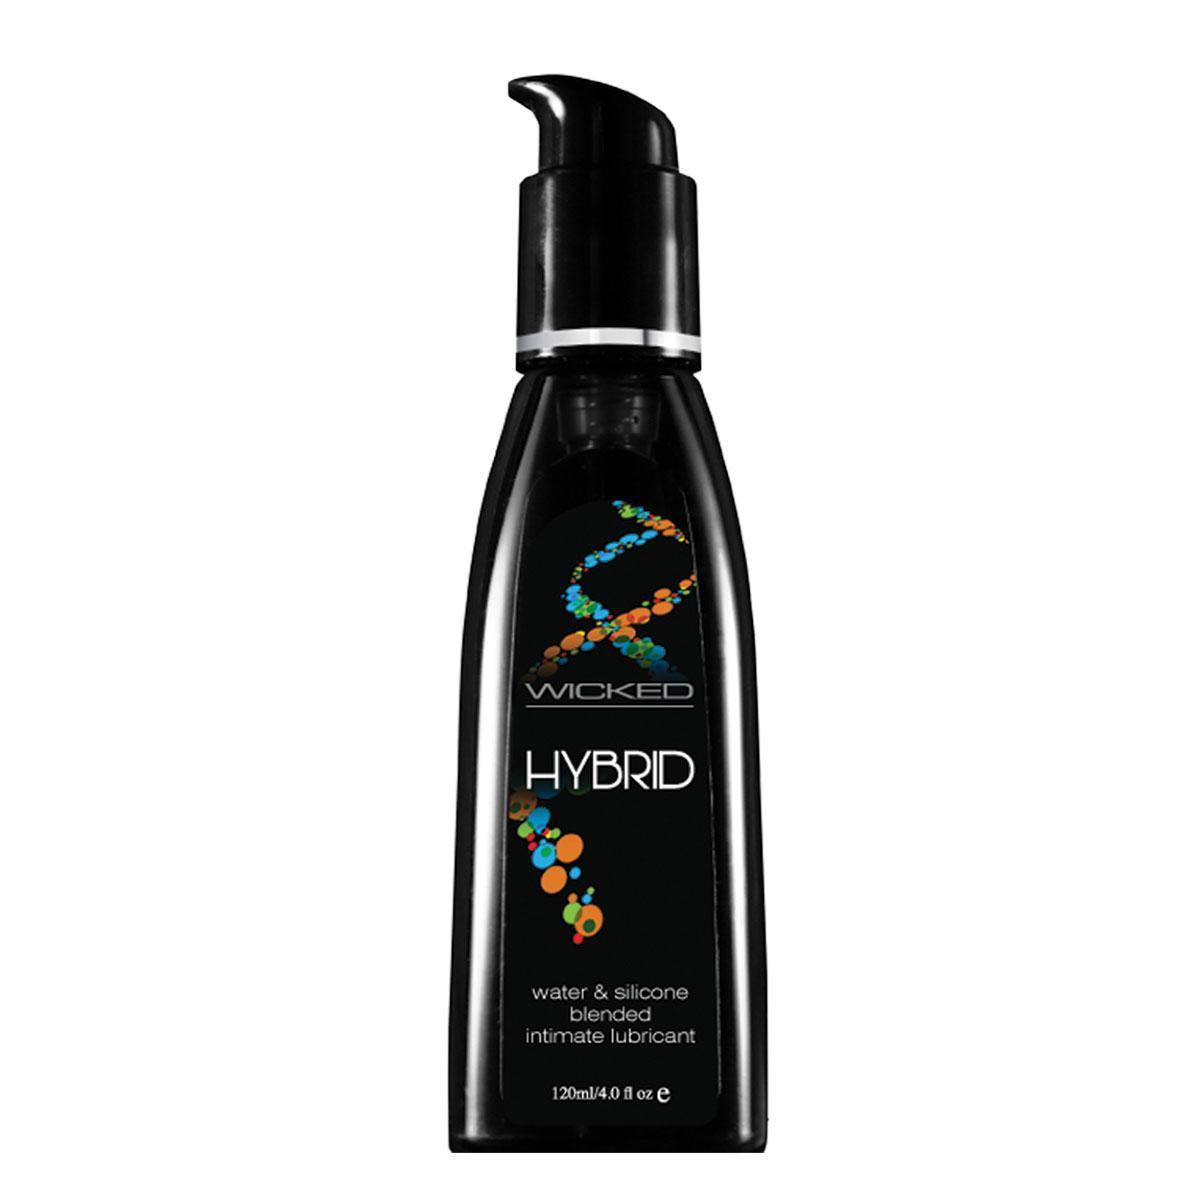 Wicked Hybrid 4oz. - Buy At Luxury Toy X - Free 3-Day Shipping